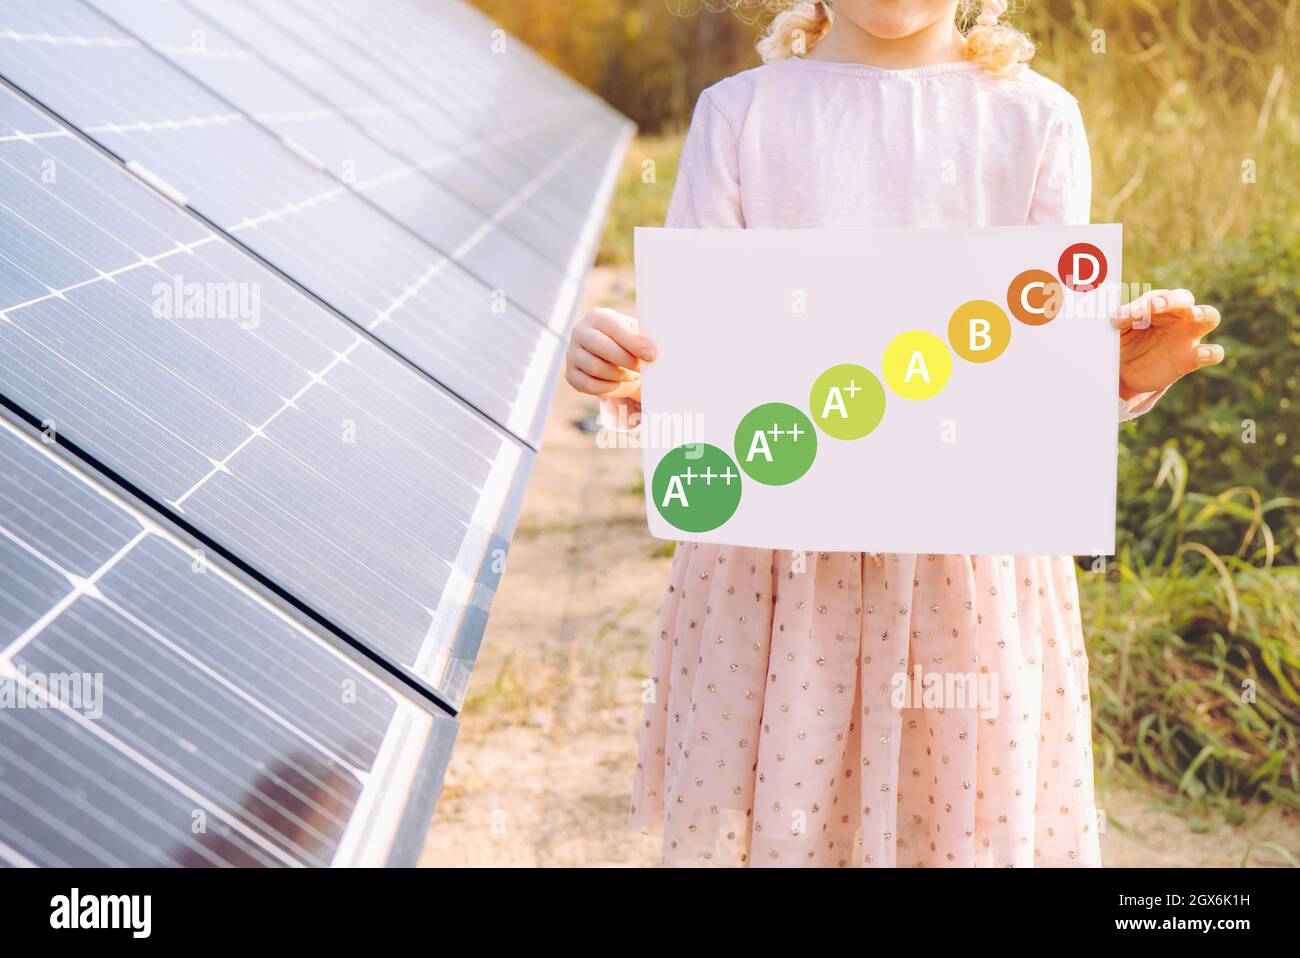 Energy consumption labeling scheme. Solar power and energy efficiency concept. Girl child standing next to home solar farm with help reduce electricit Stock Photo